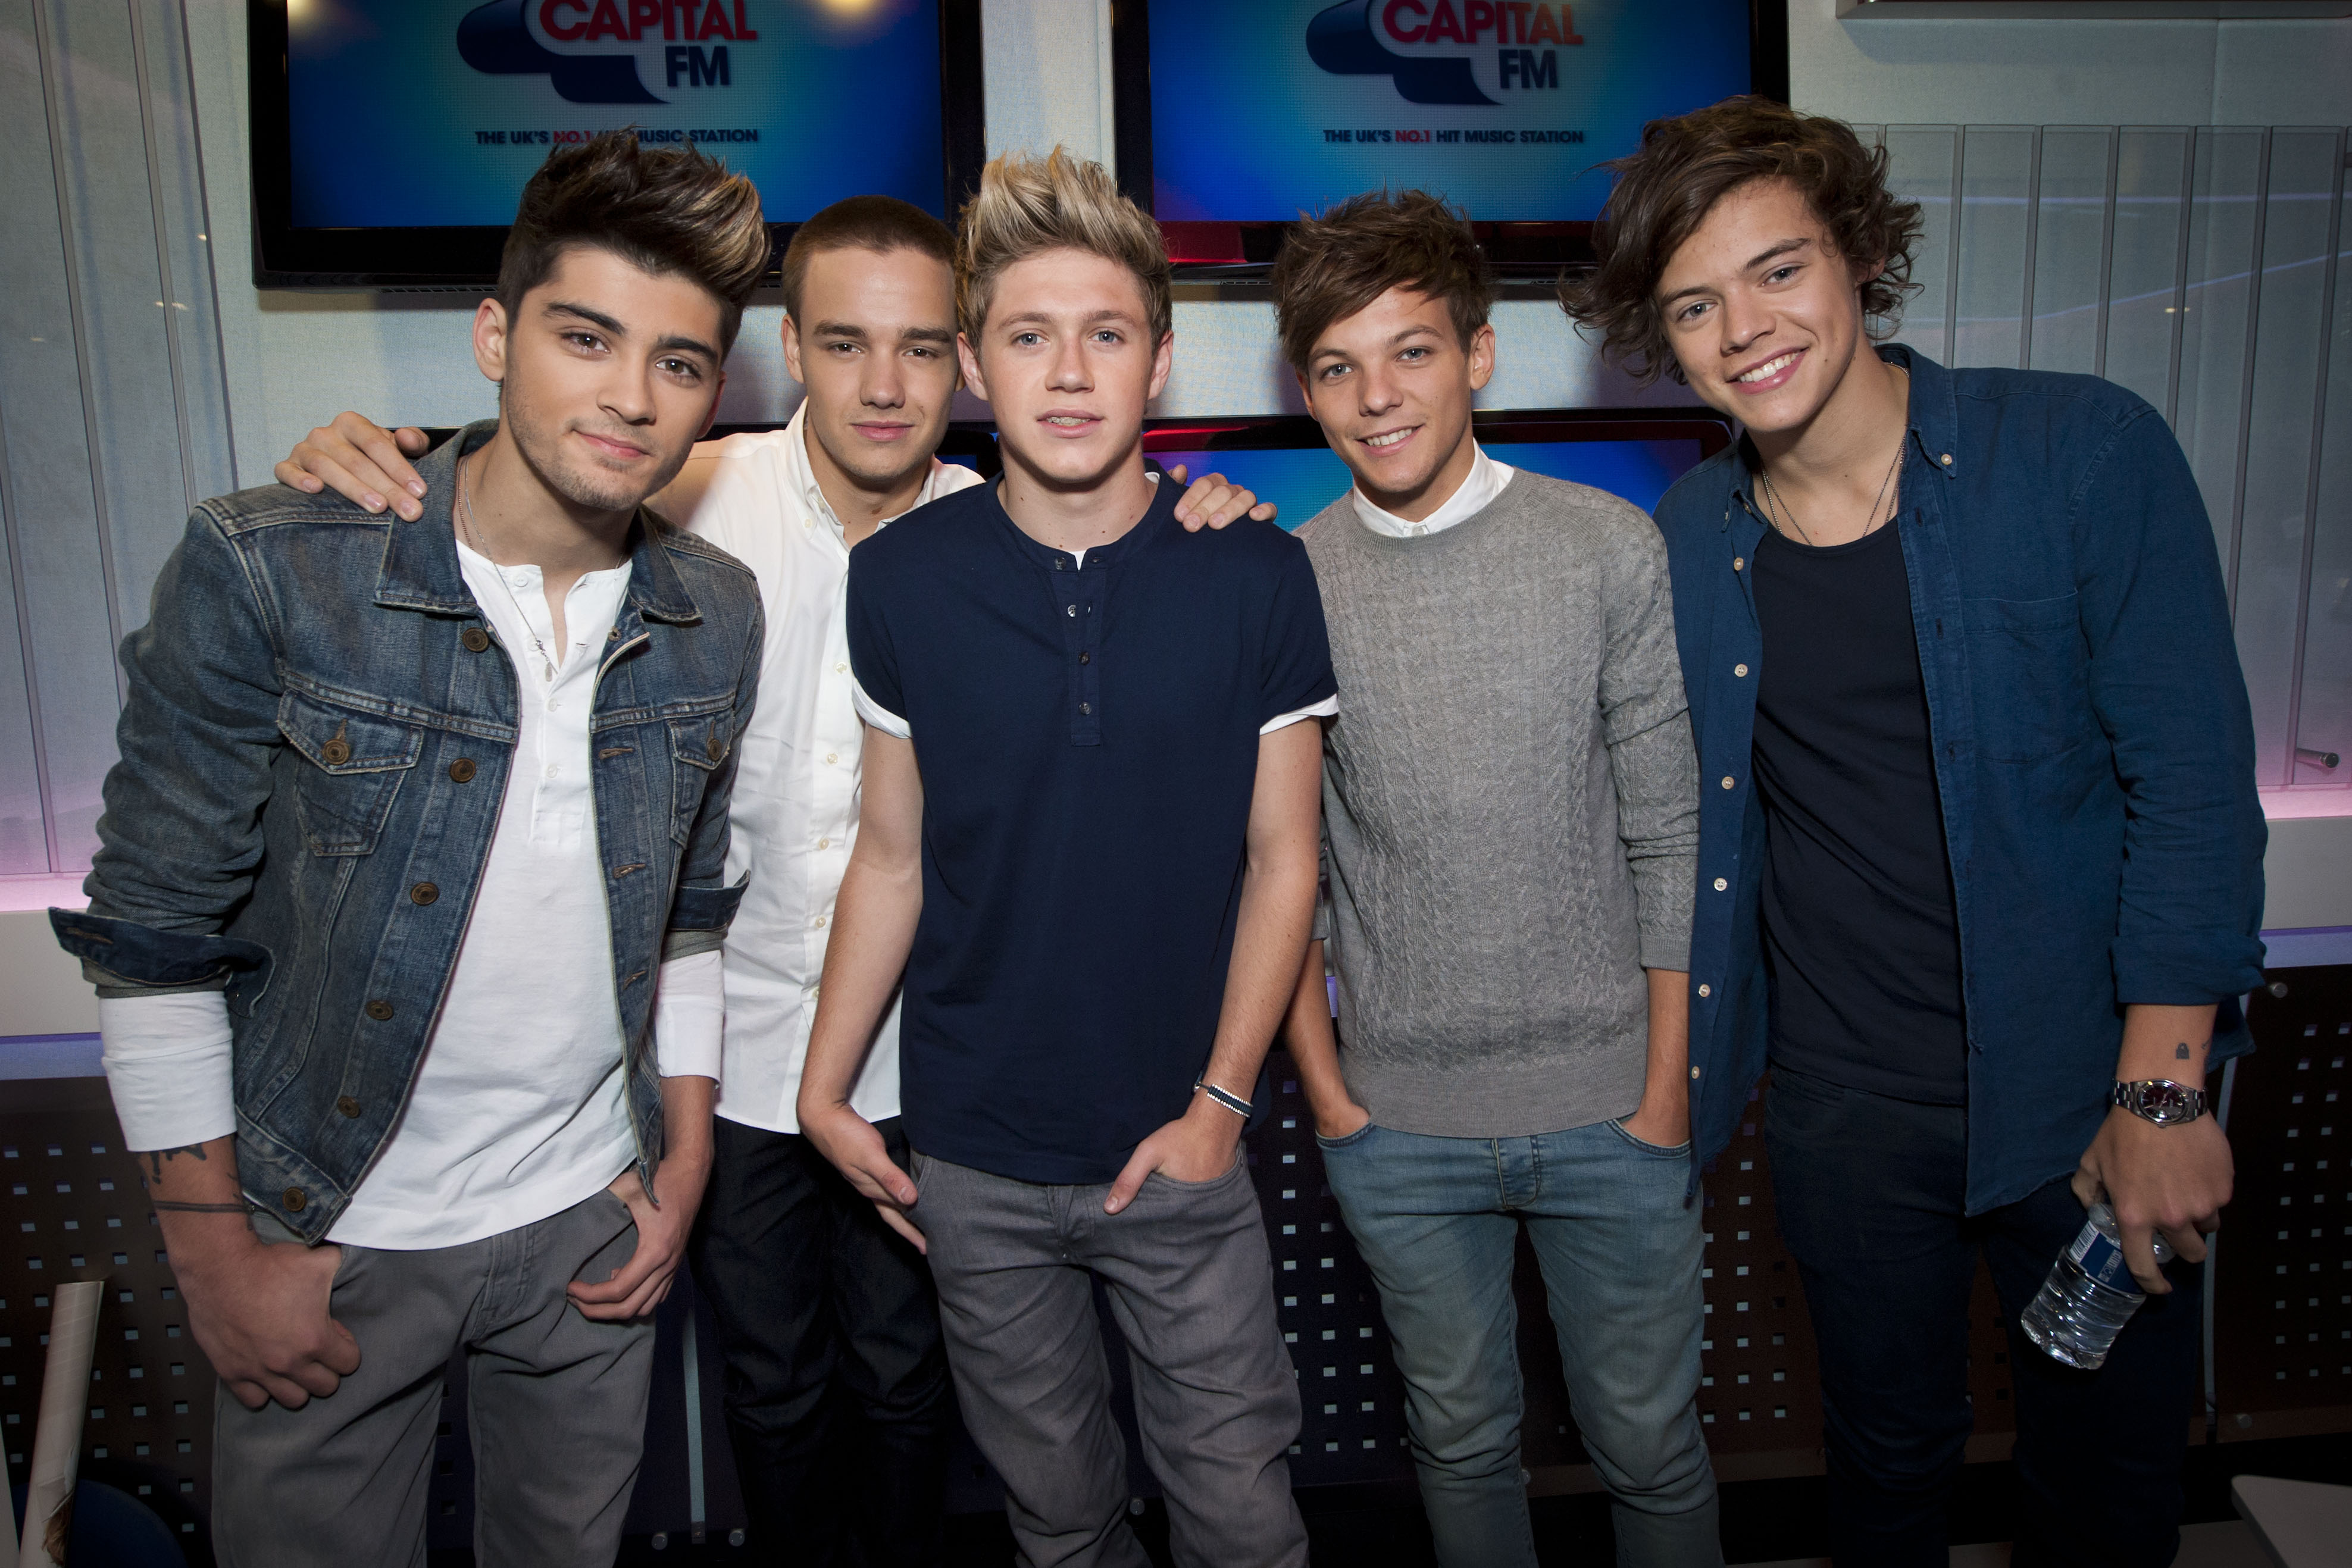 Download One direction in high resolution for Get One direction 3952x2635